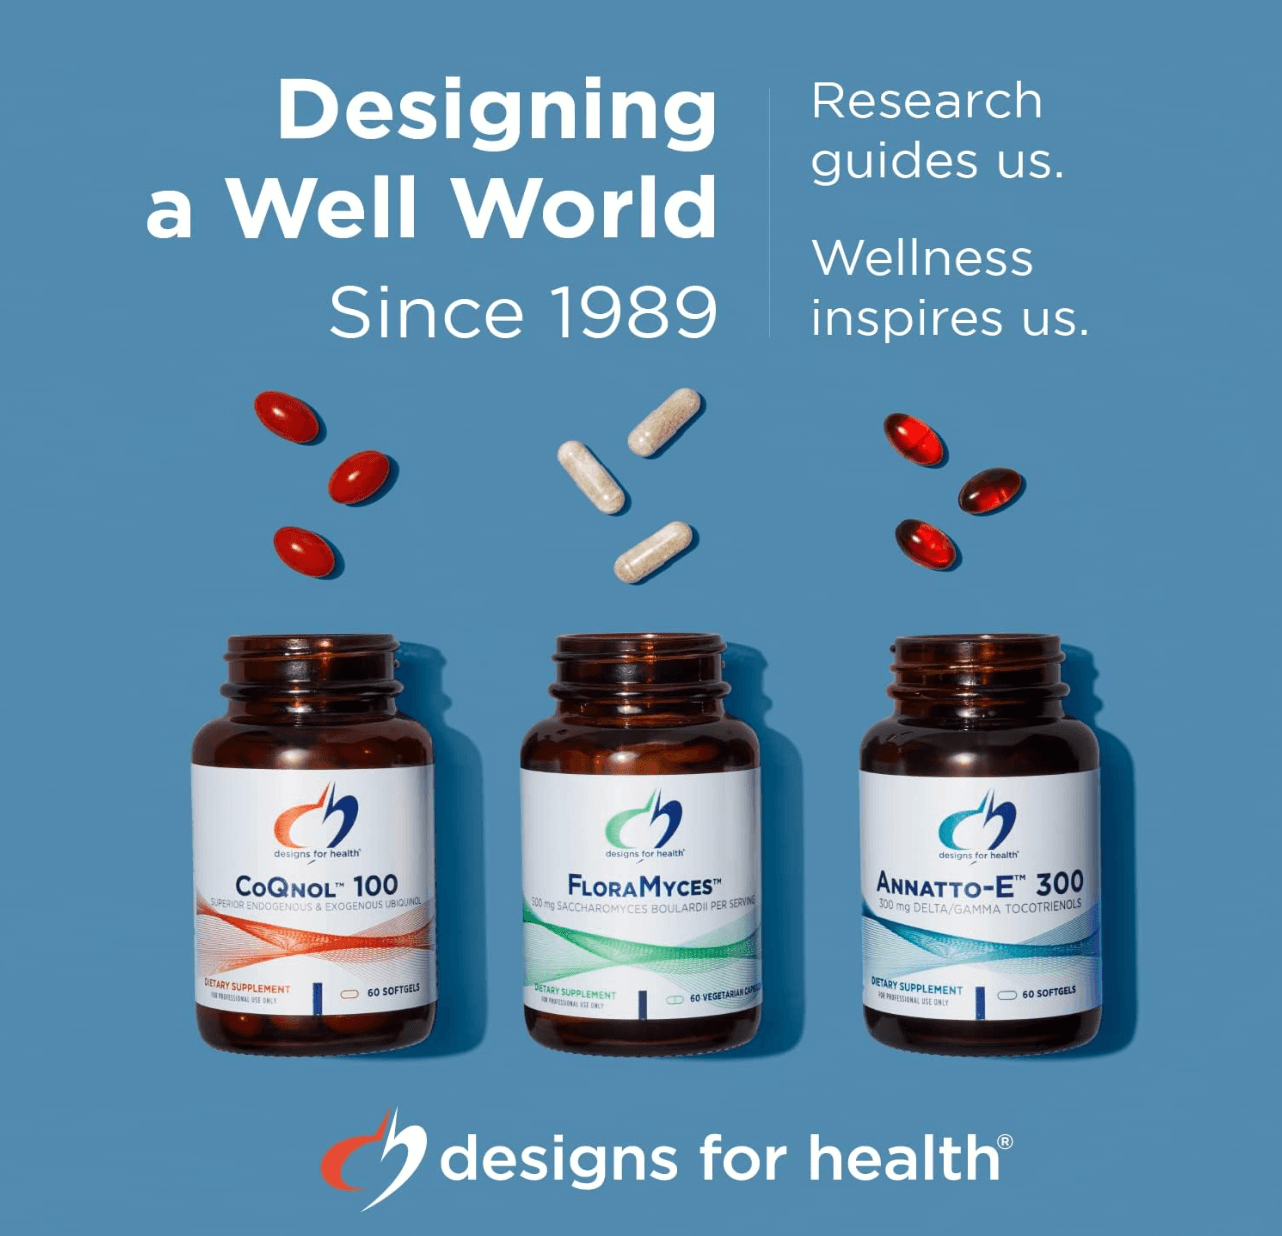 Designs for health Acetyl l-carnitine capsules